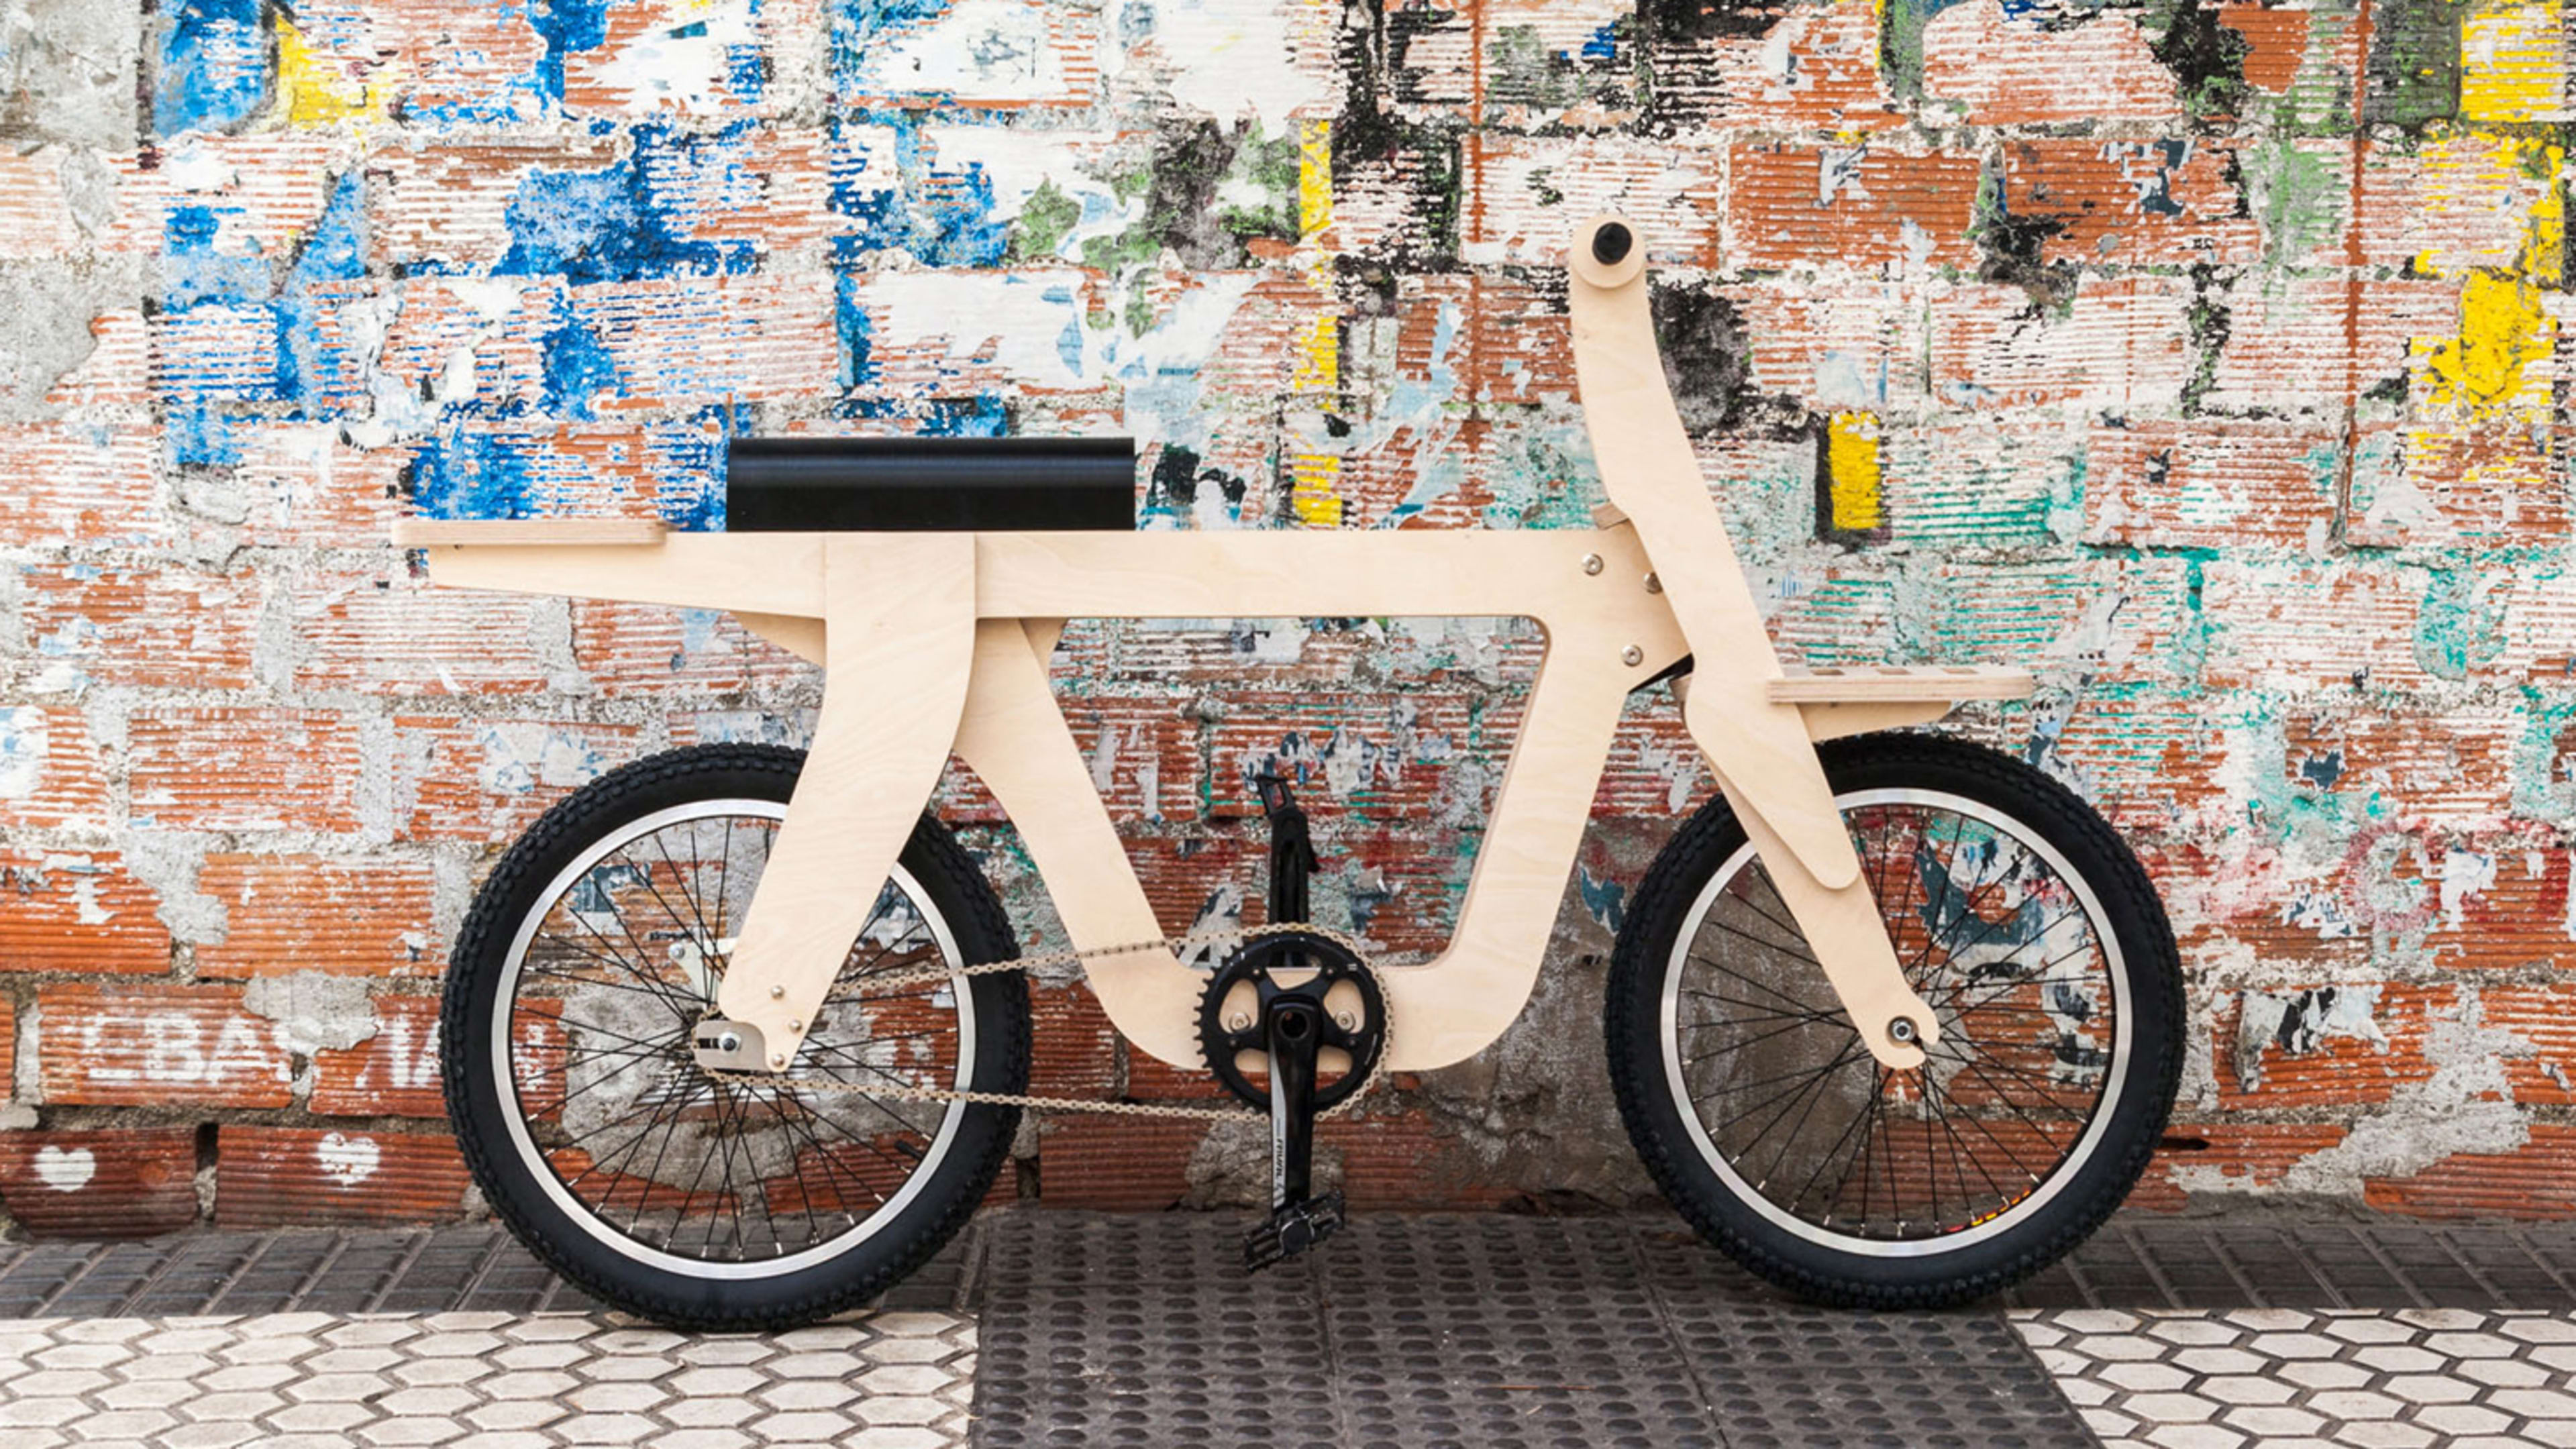 You can download, print, and ride away on this sleek wooden bike